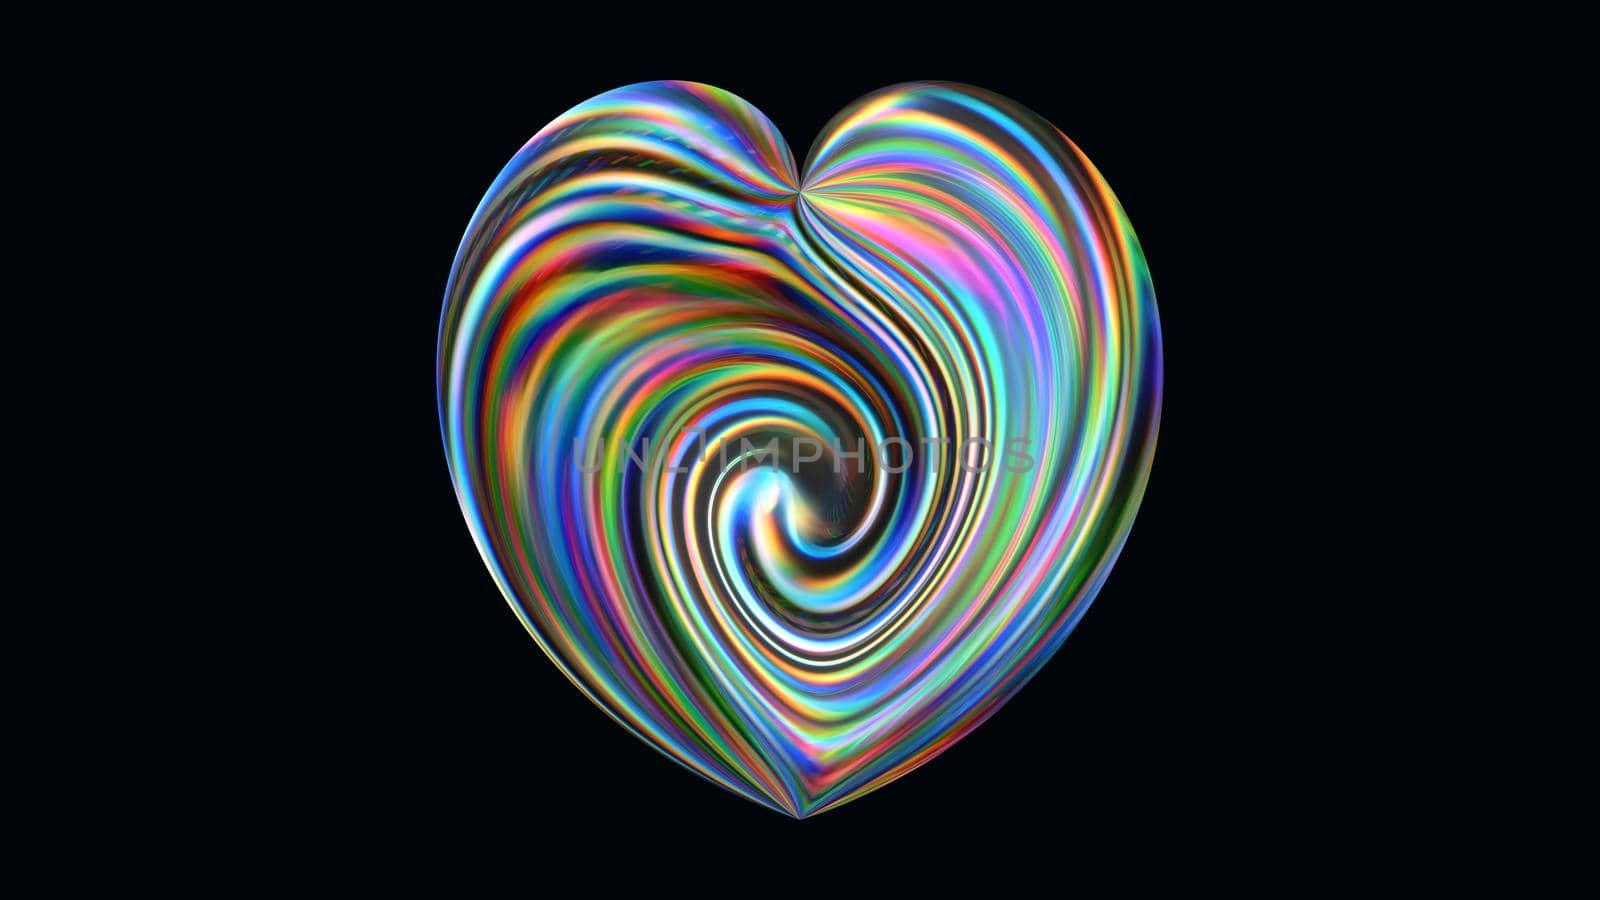 An abstract rainbow figure of the heart on a black background. by Vvicca